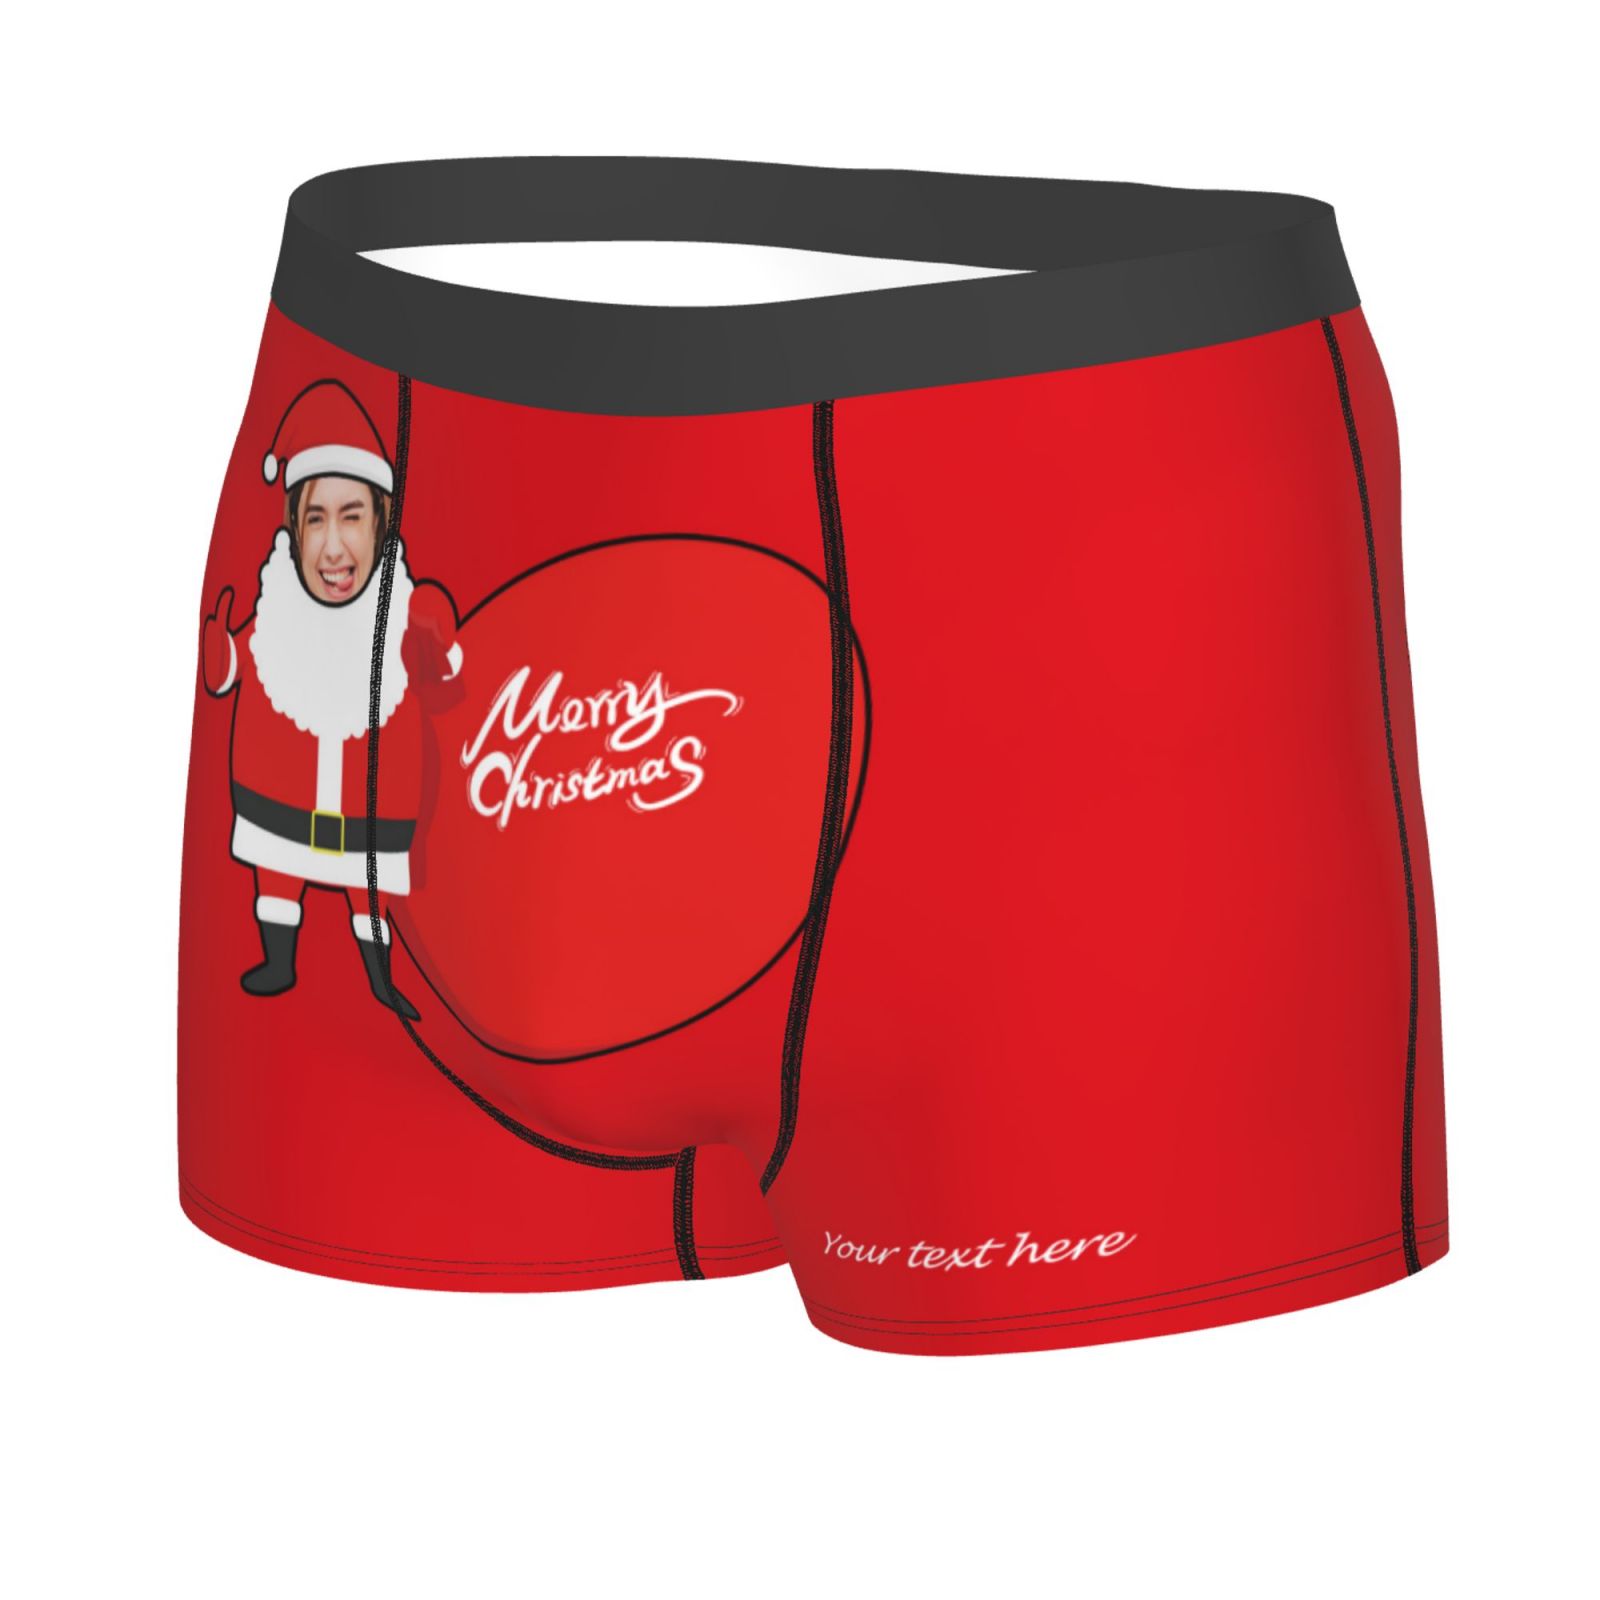 Custom Face Underwear Santa Claus Personalized Photo Boxers Christmas Gift For Men